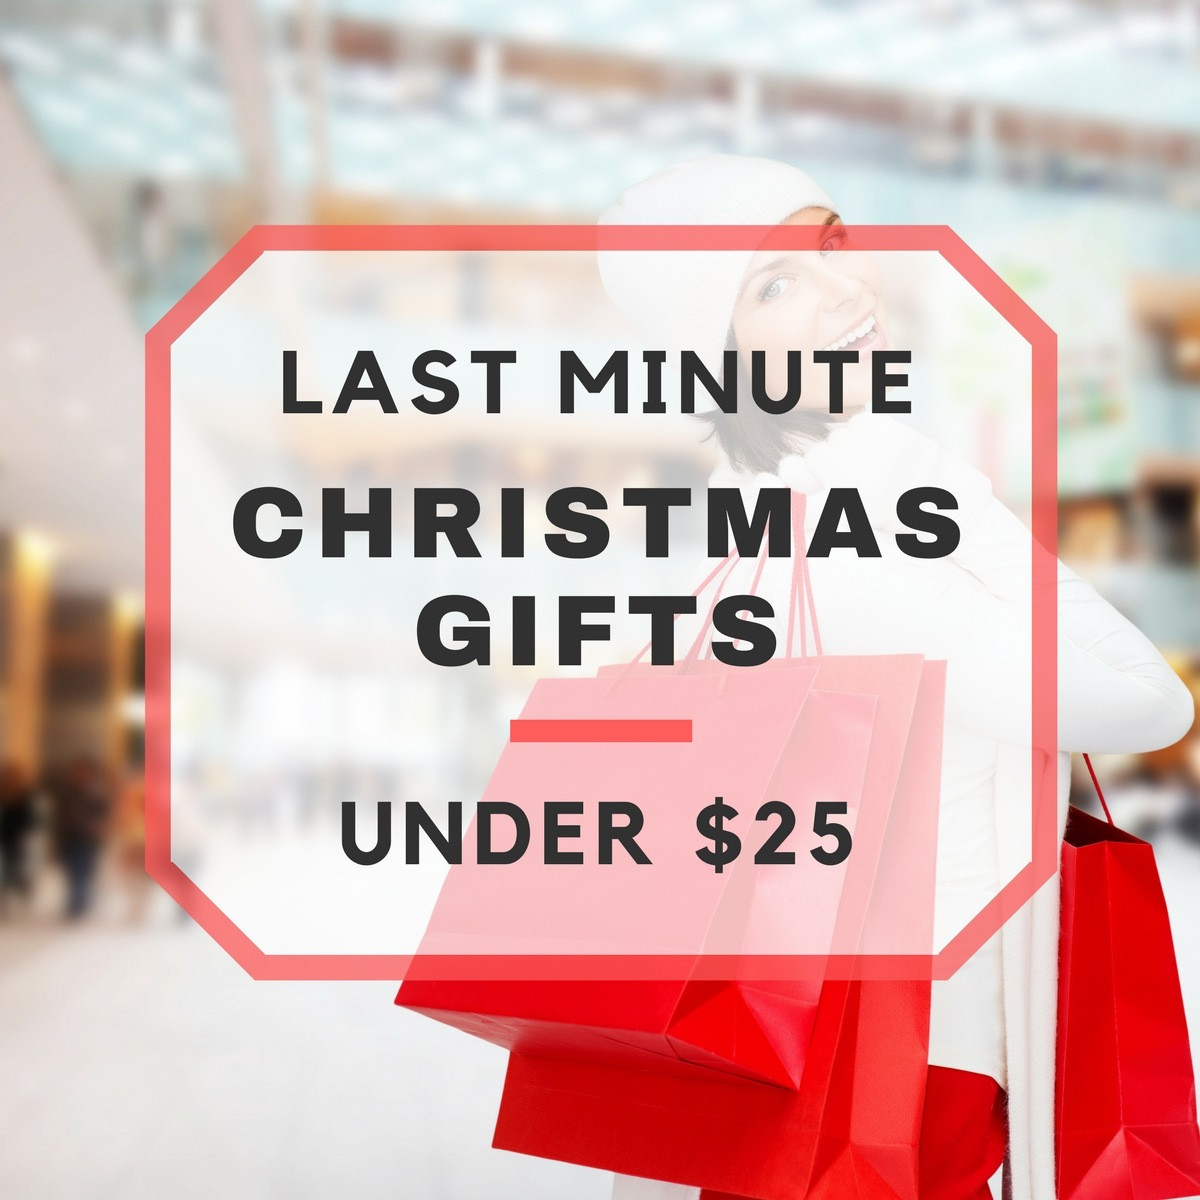 Christmas Gift Under $25
 Last Minute Christmas Gifts Under $25